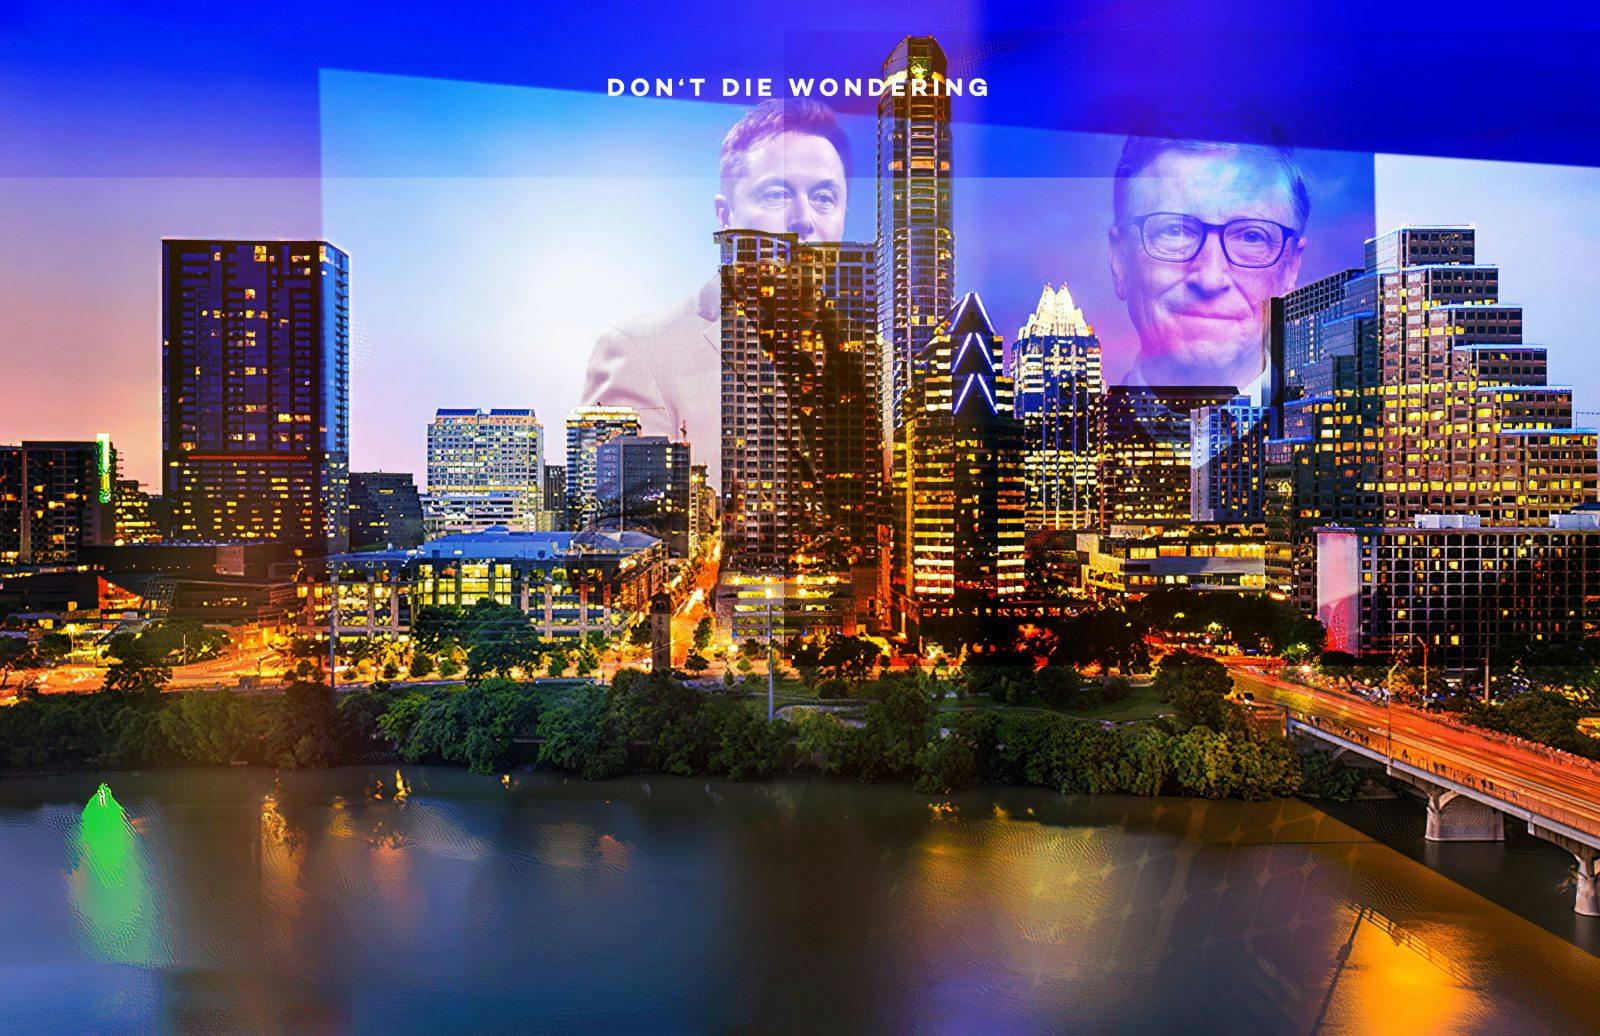 Austin is set to become America’s next tech capital